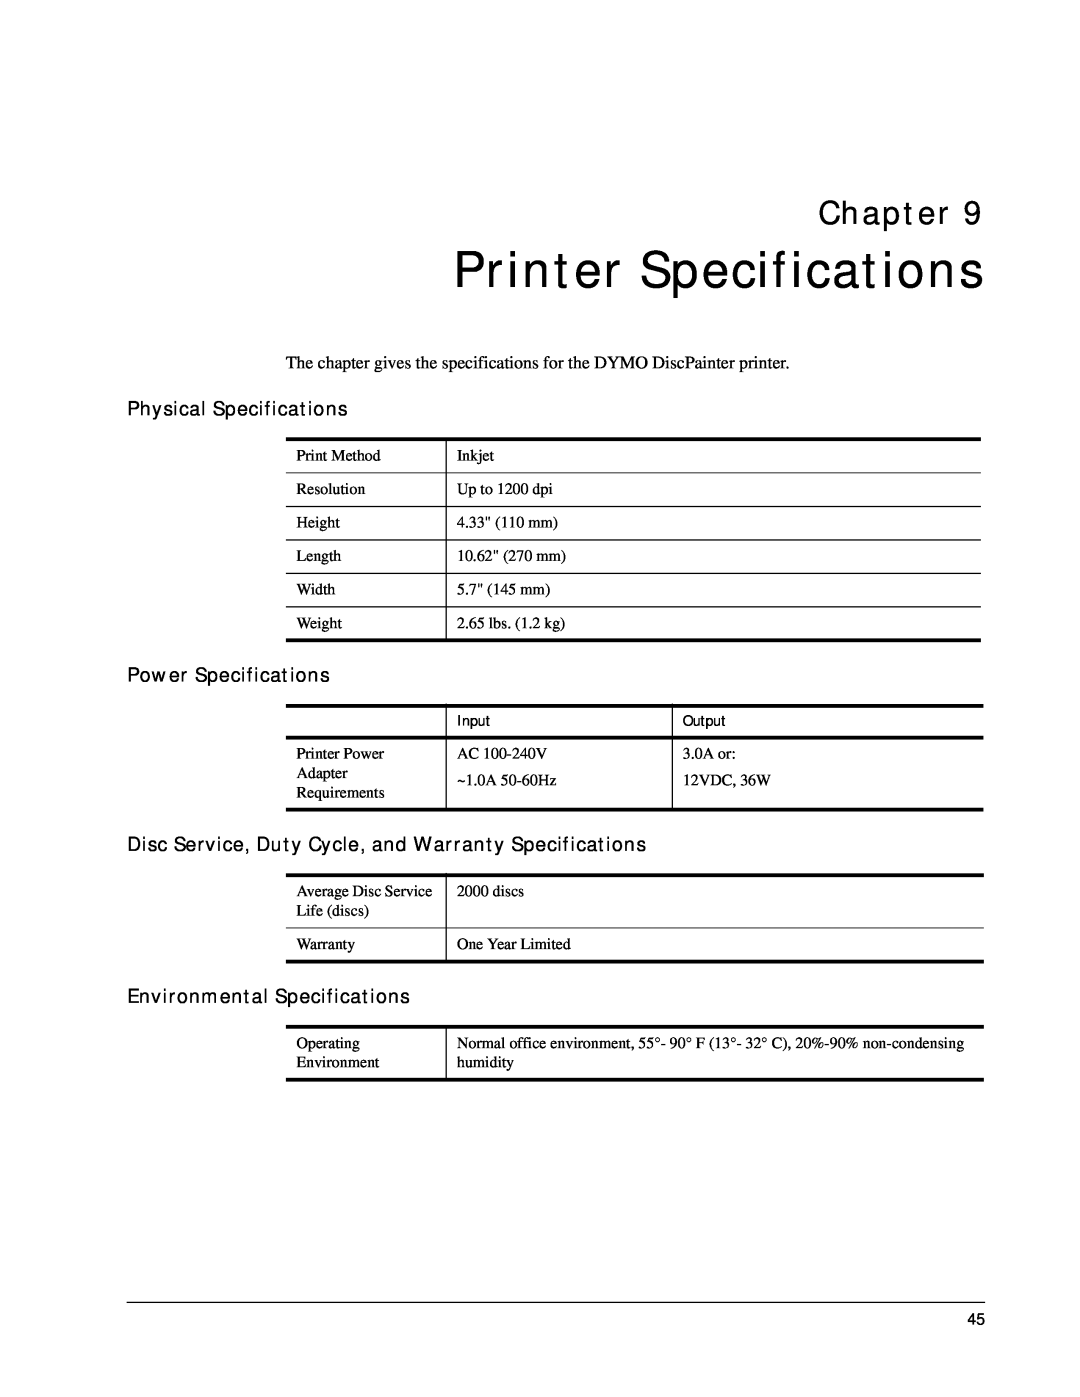 Dymo DiscPainter manual Printer Specifications, Physical Specifications, Power Specifications, Environmental Specifications 